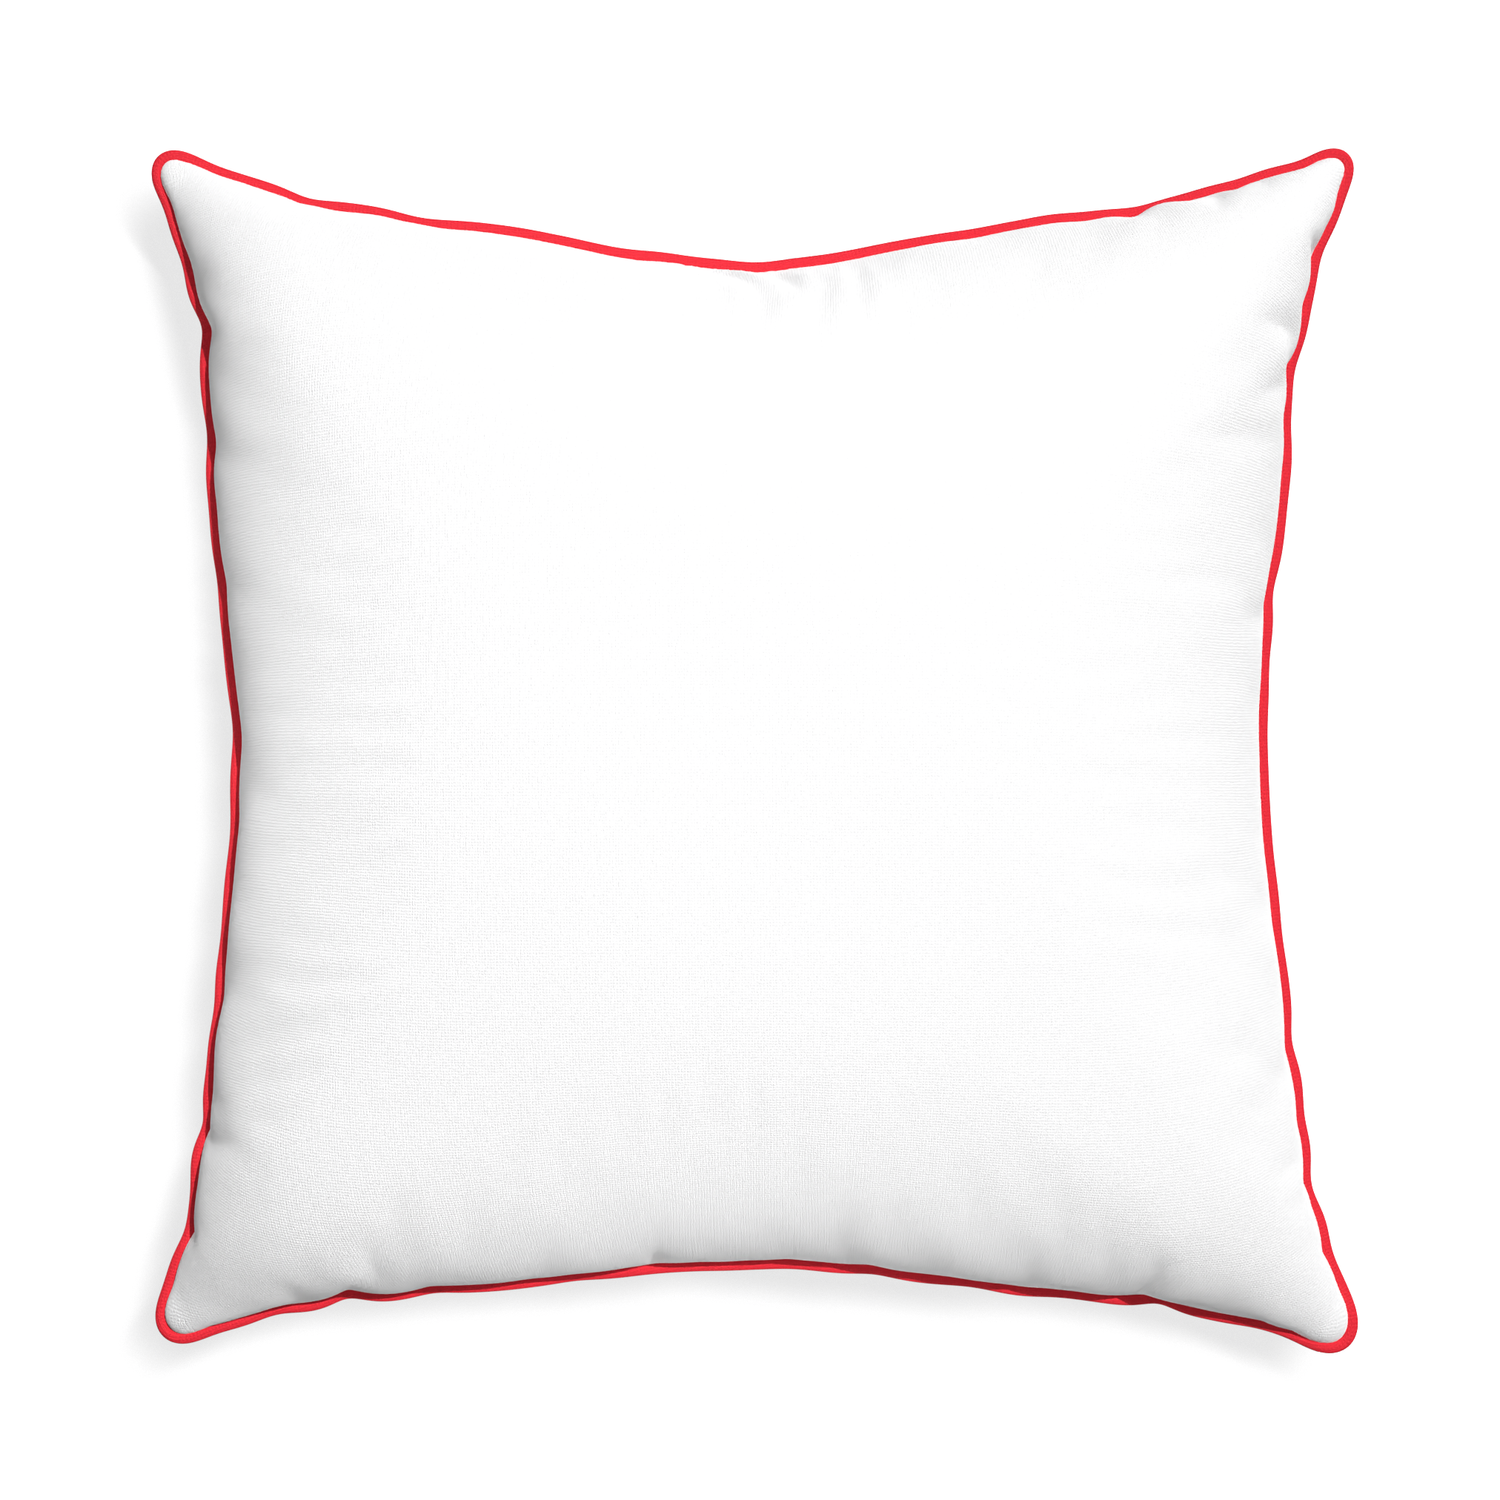 Euro-sham snow custom pillow with cherry piping on white background